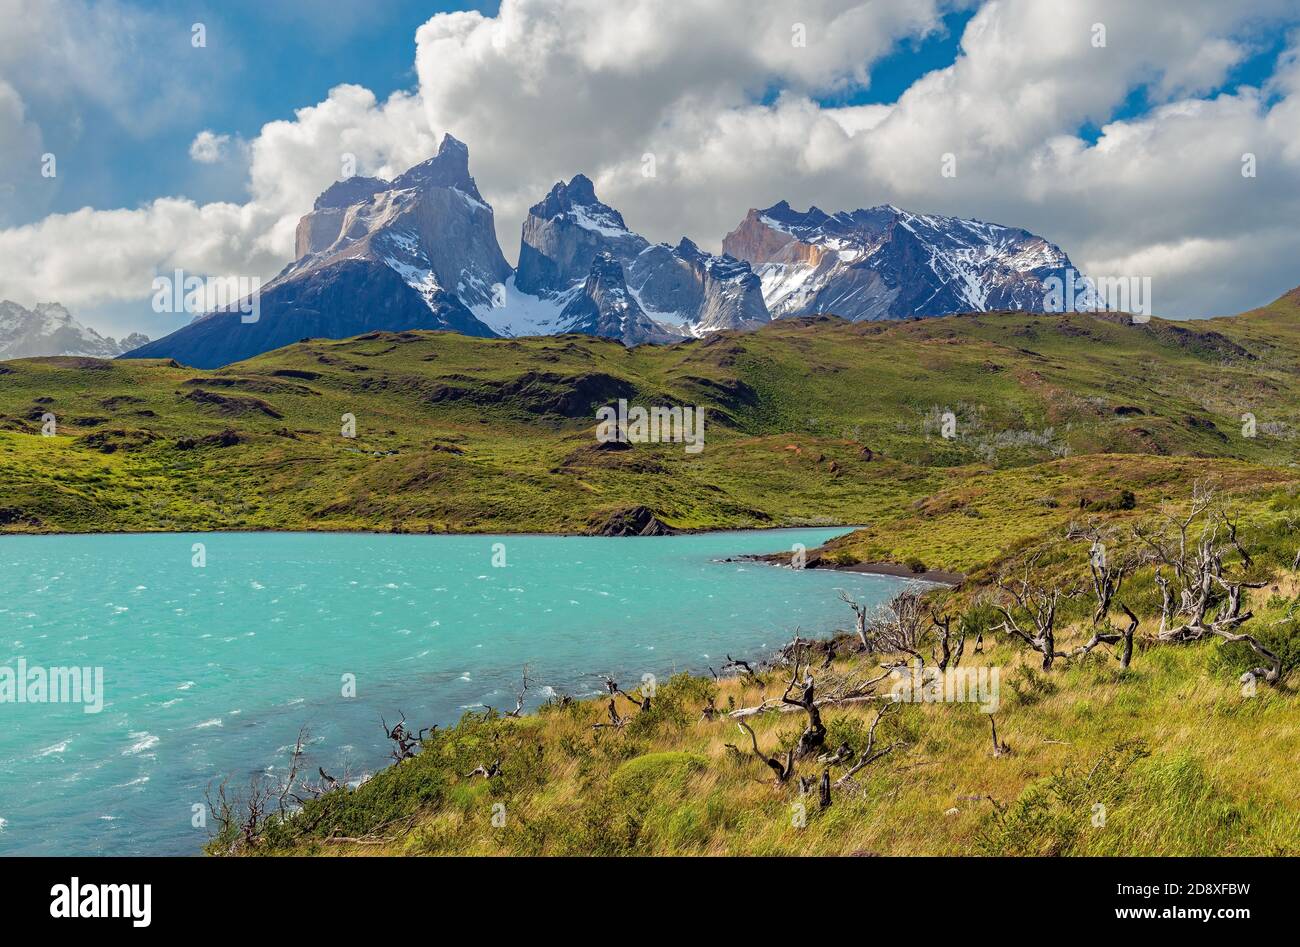 The majestic Torres del Paine Andes mountain peaks by Pehoe Lake, Torres del Paine national park, Patagonia, Chile. Stock Photo